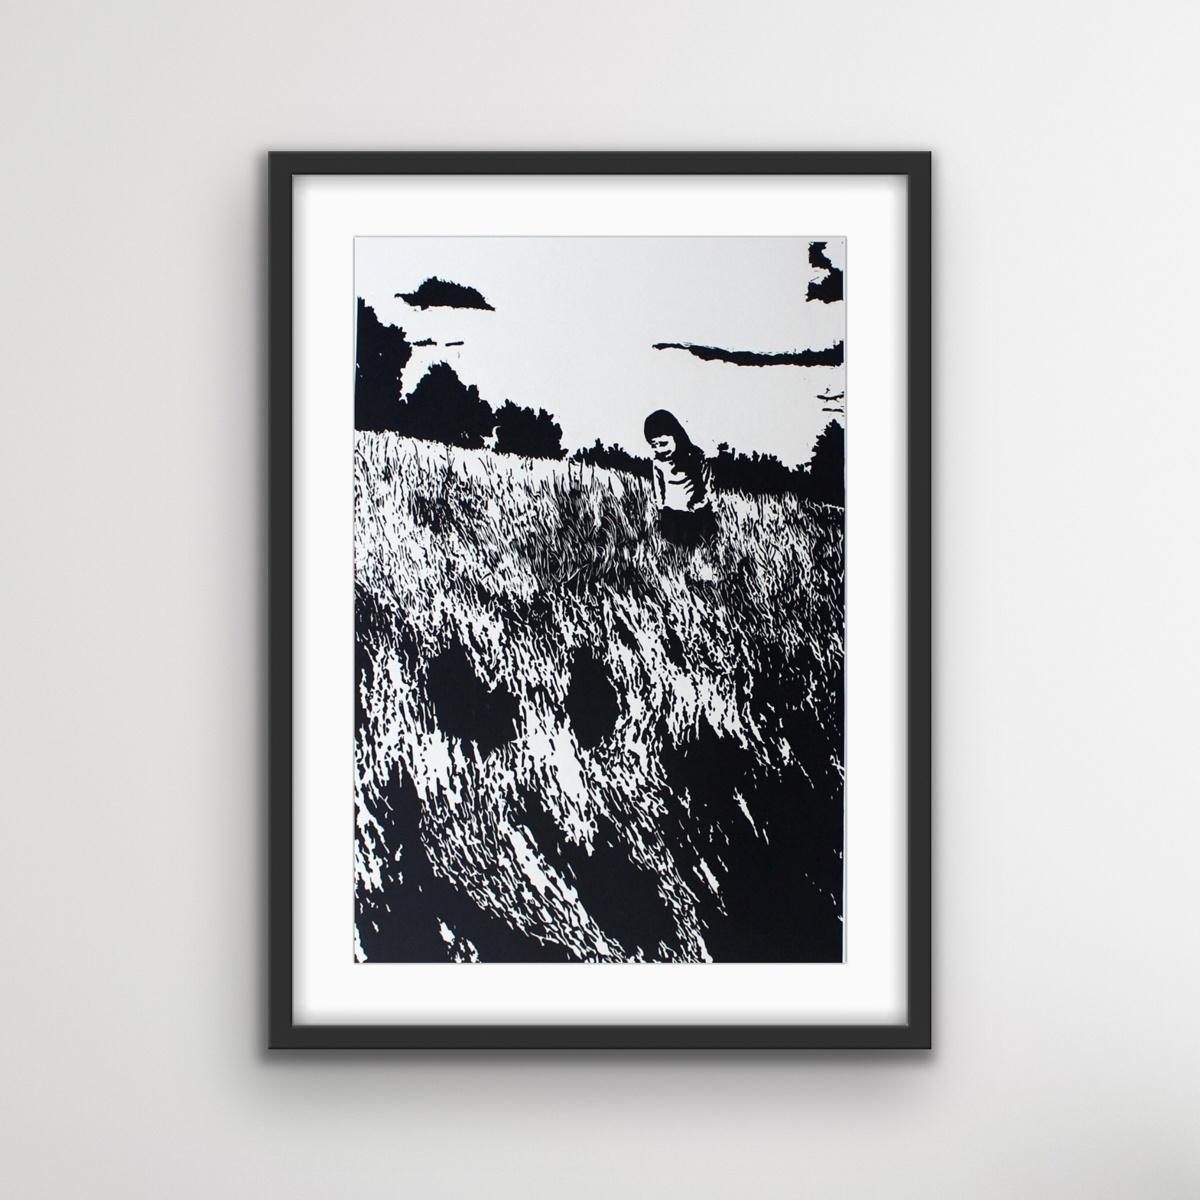 Contemporary minimalistic black & white linocut print on paper by Polish artist Jolanta Babicz. Edition is limited to 20 copies. 

Artwork is not framed. Photos with frame are only visualizations.

JOLANTA BABICZ (born in 1967)
In 2009 she graduated